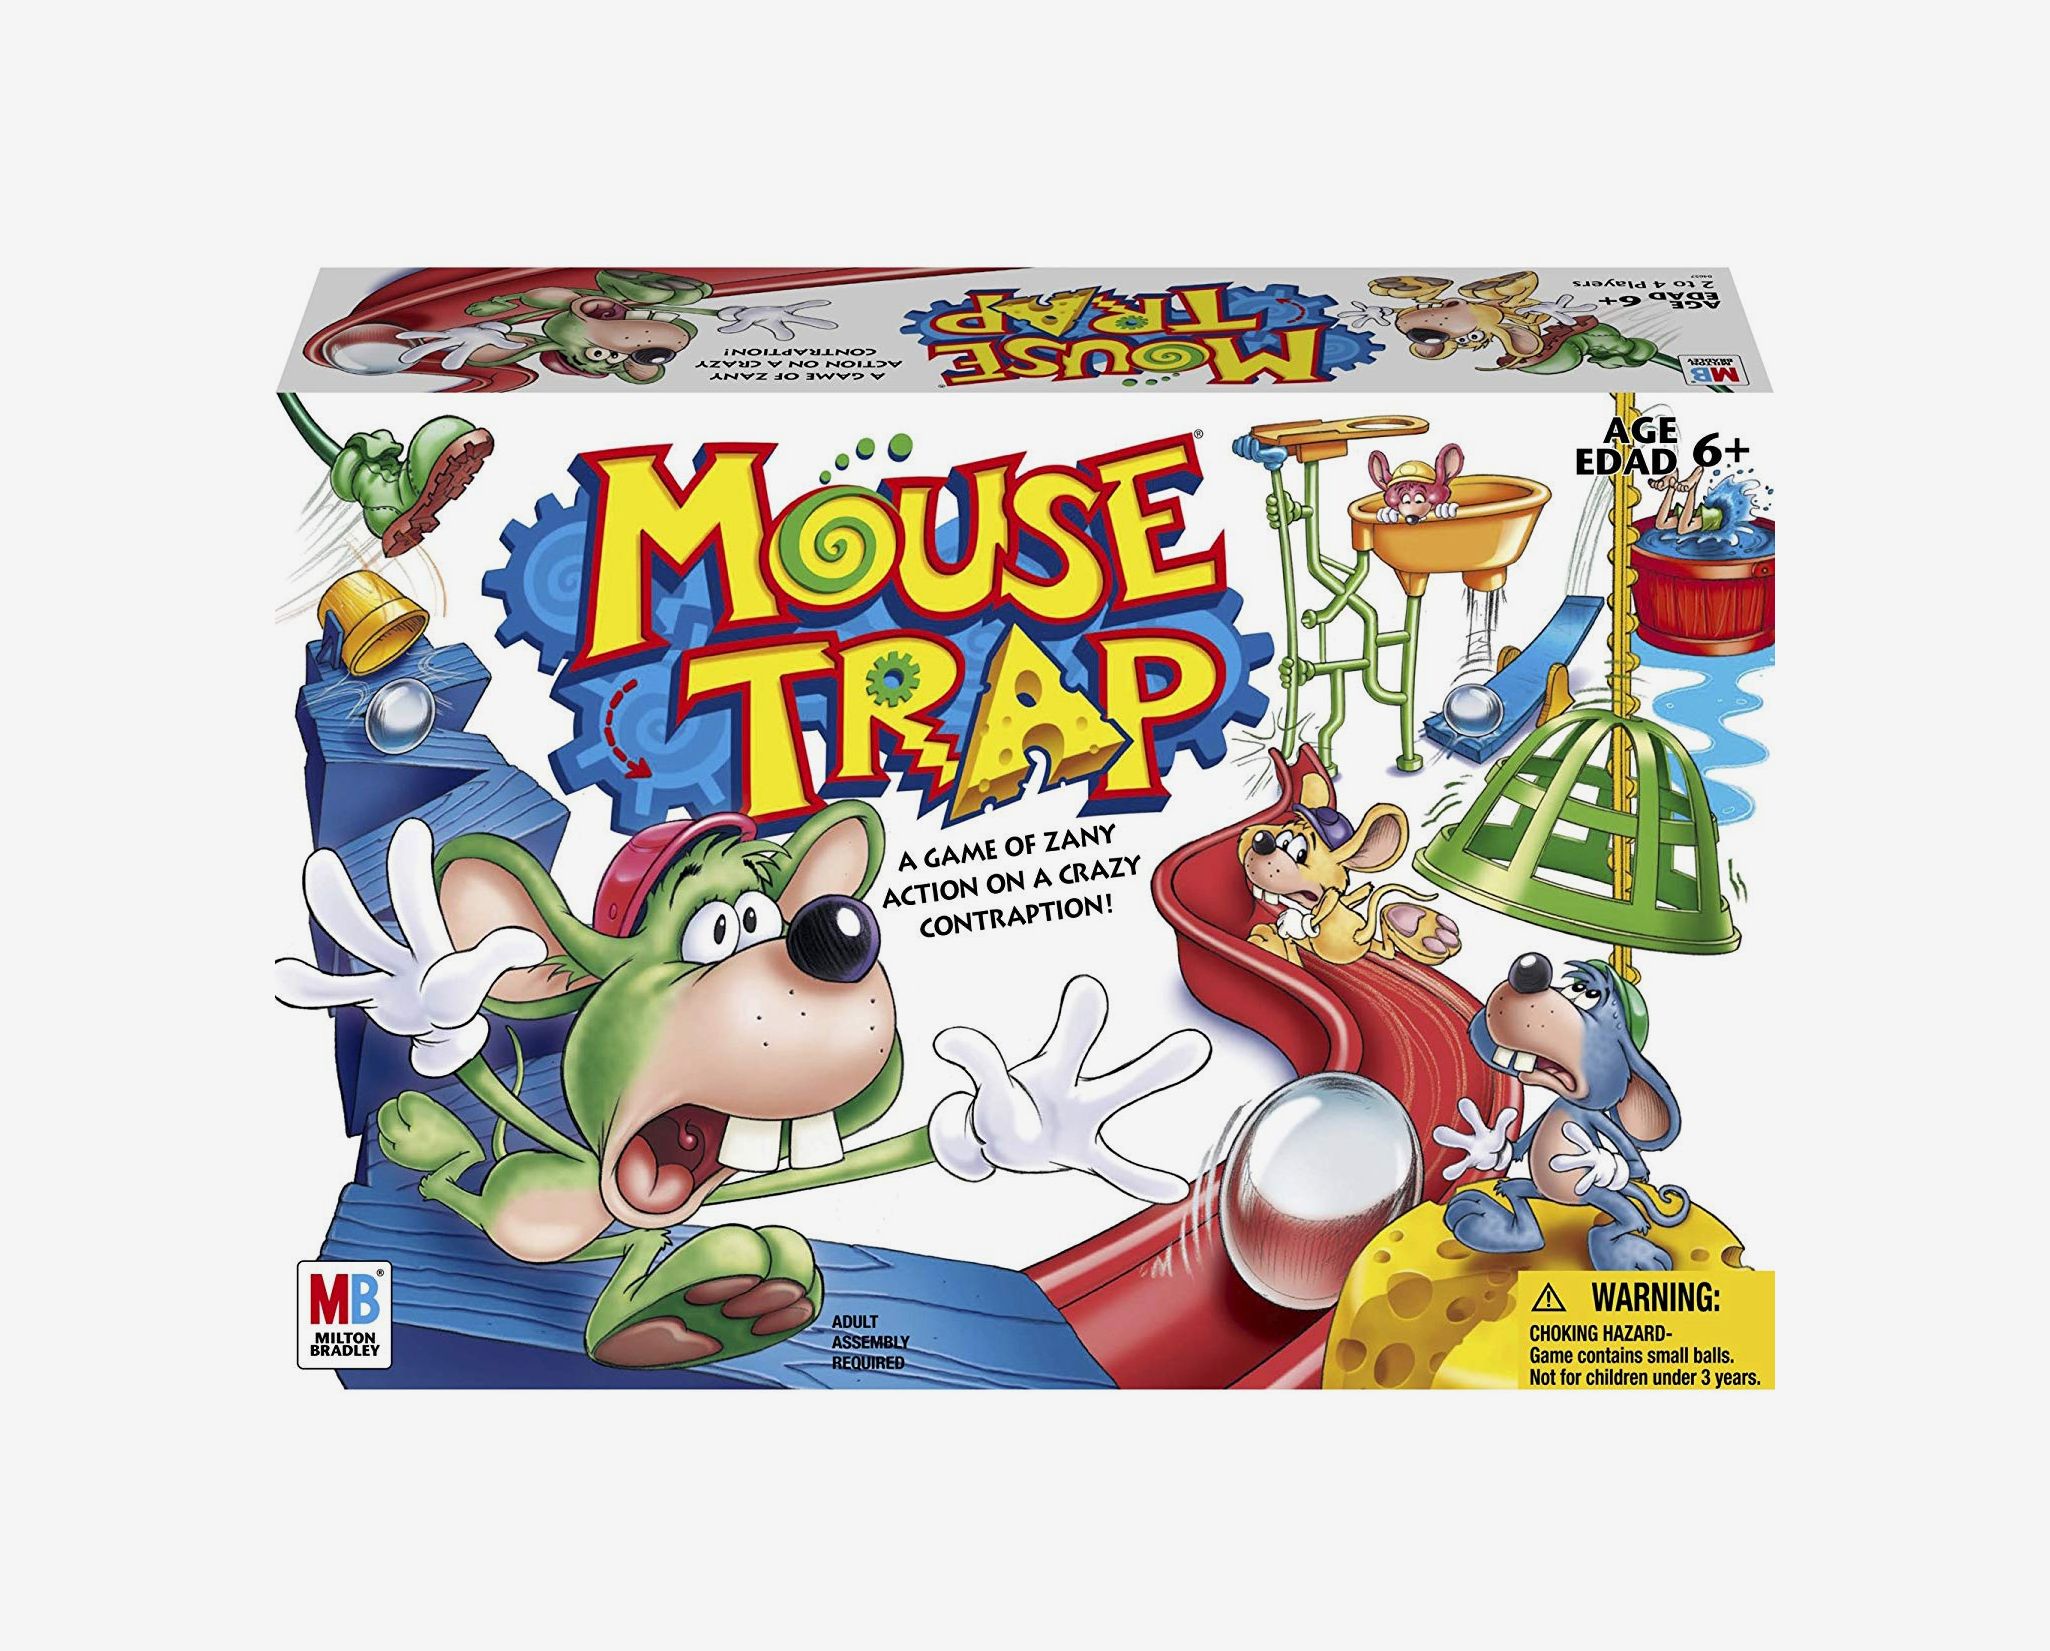 Catch the Mouse is the fun and exciting point-grabbing game 